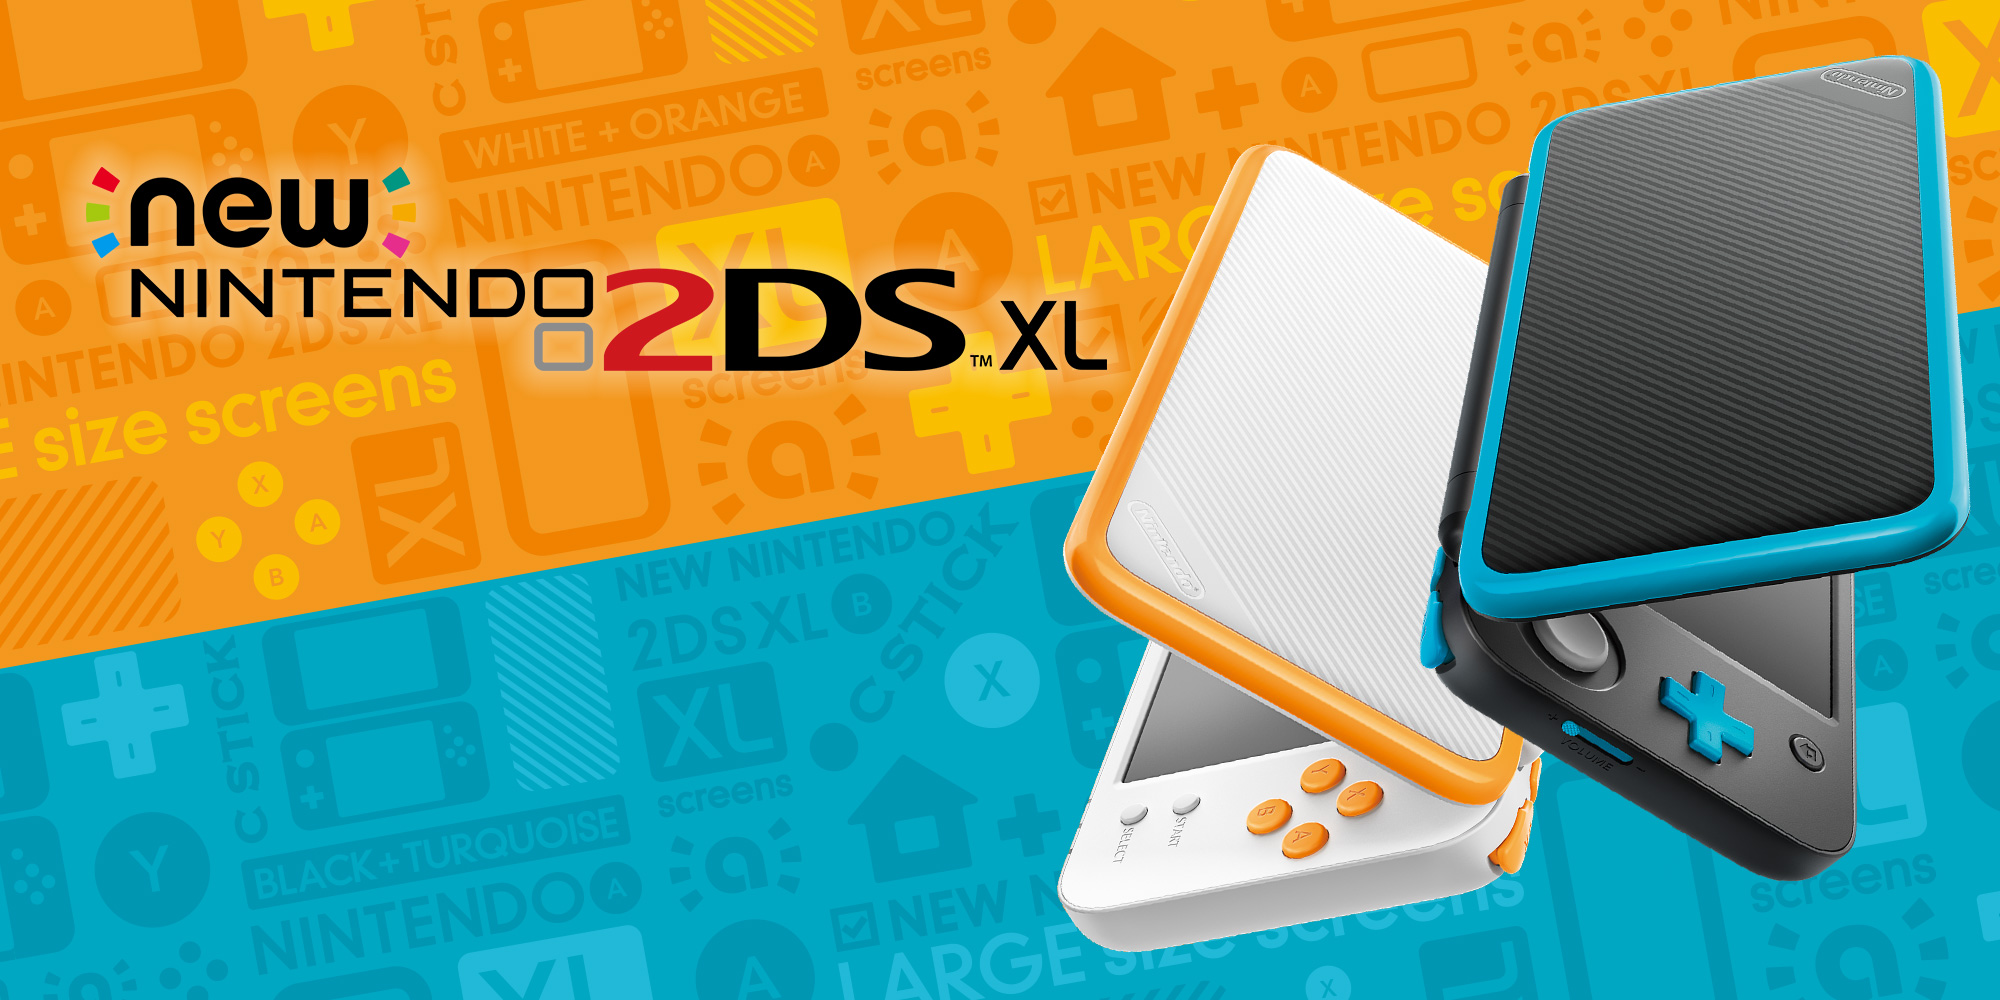 when did the nintendo 2ds xl come out